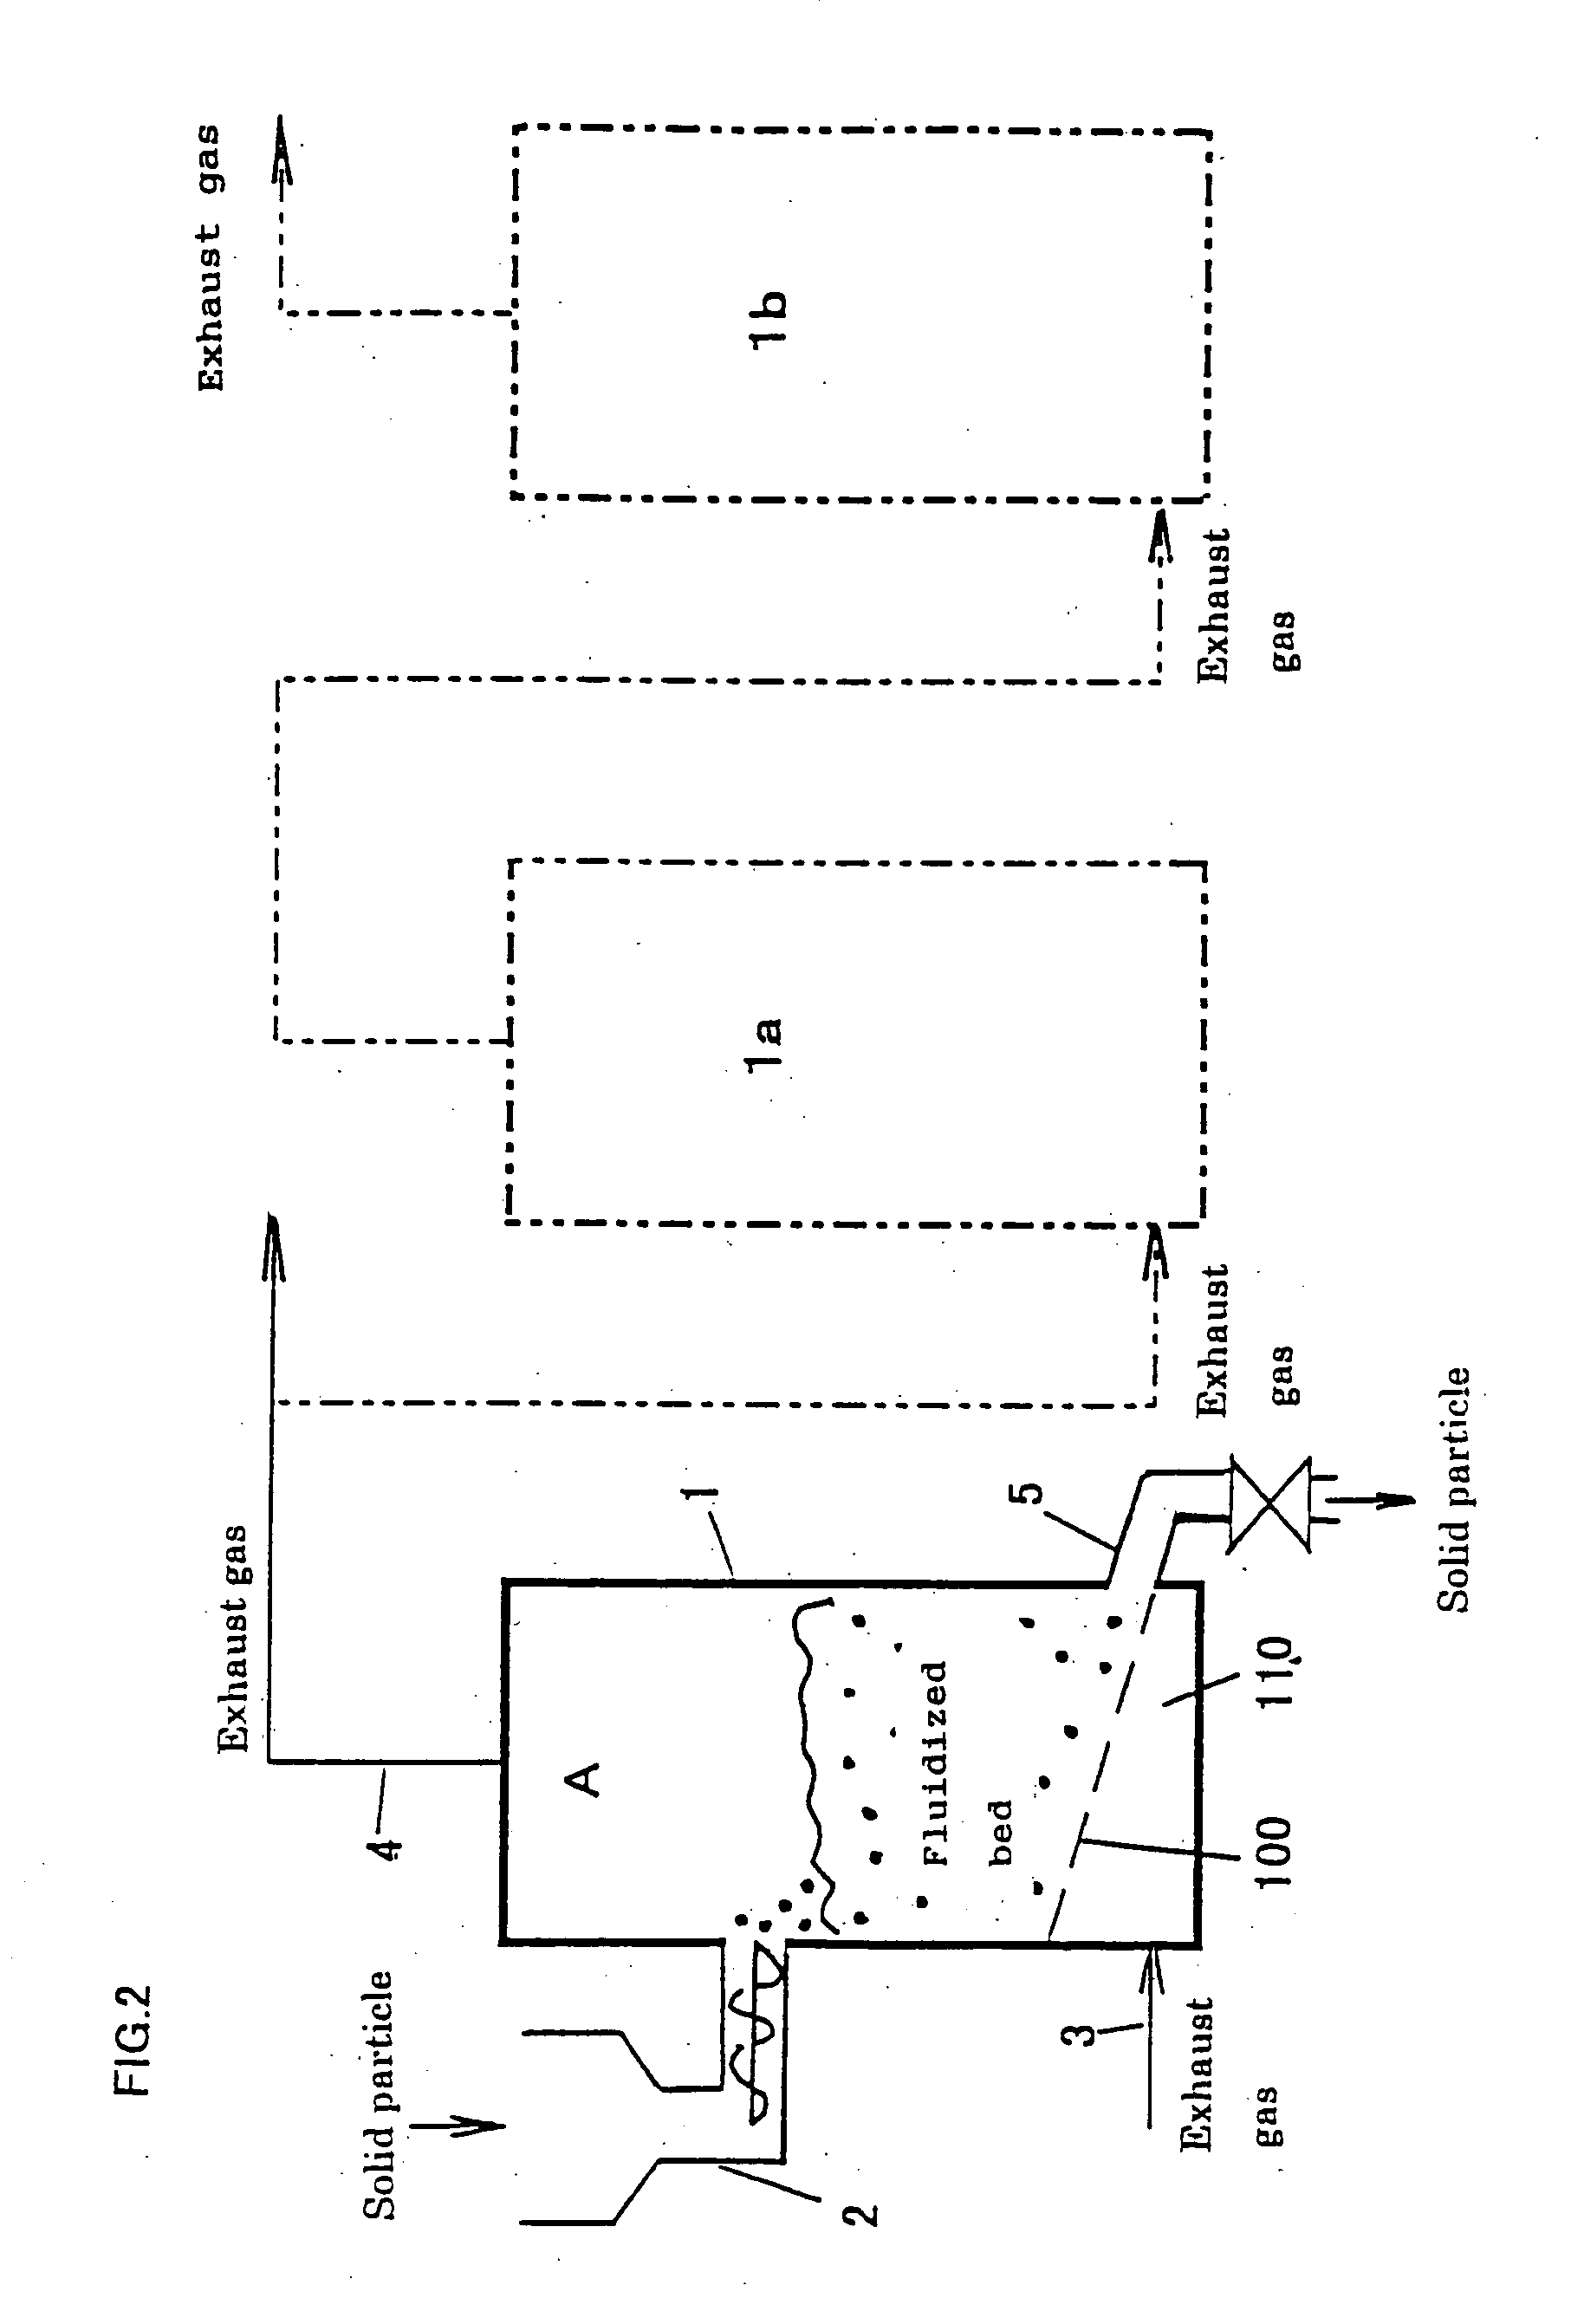 Method for reducing exhaust carbon dioxide